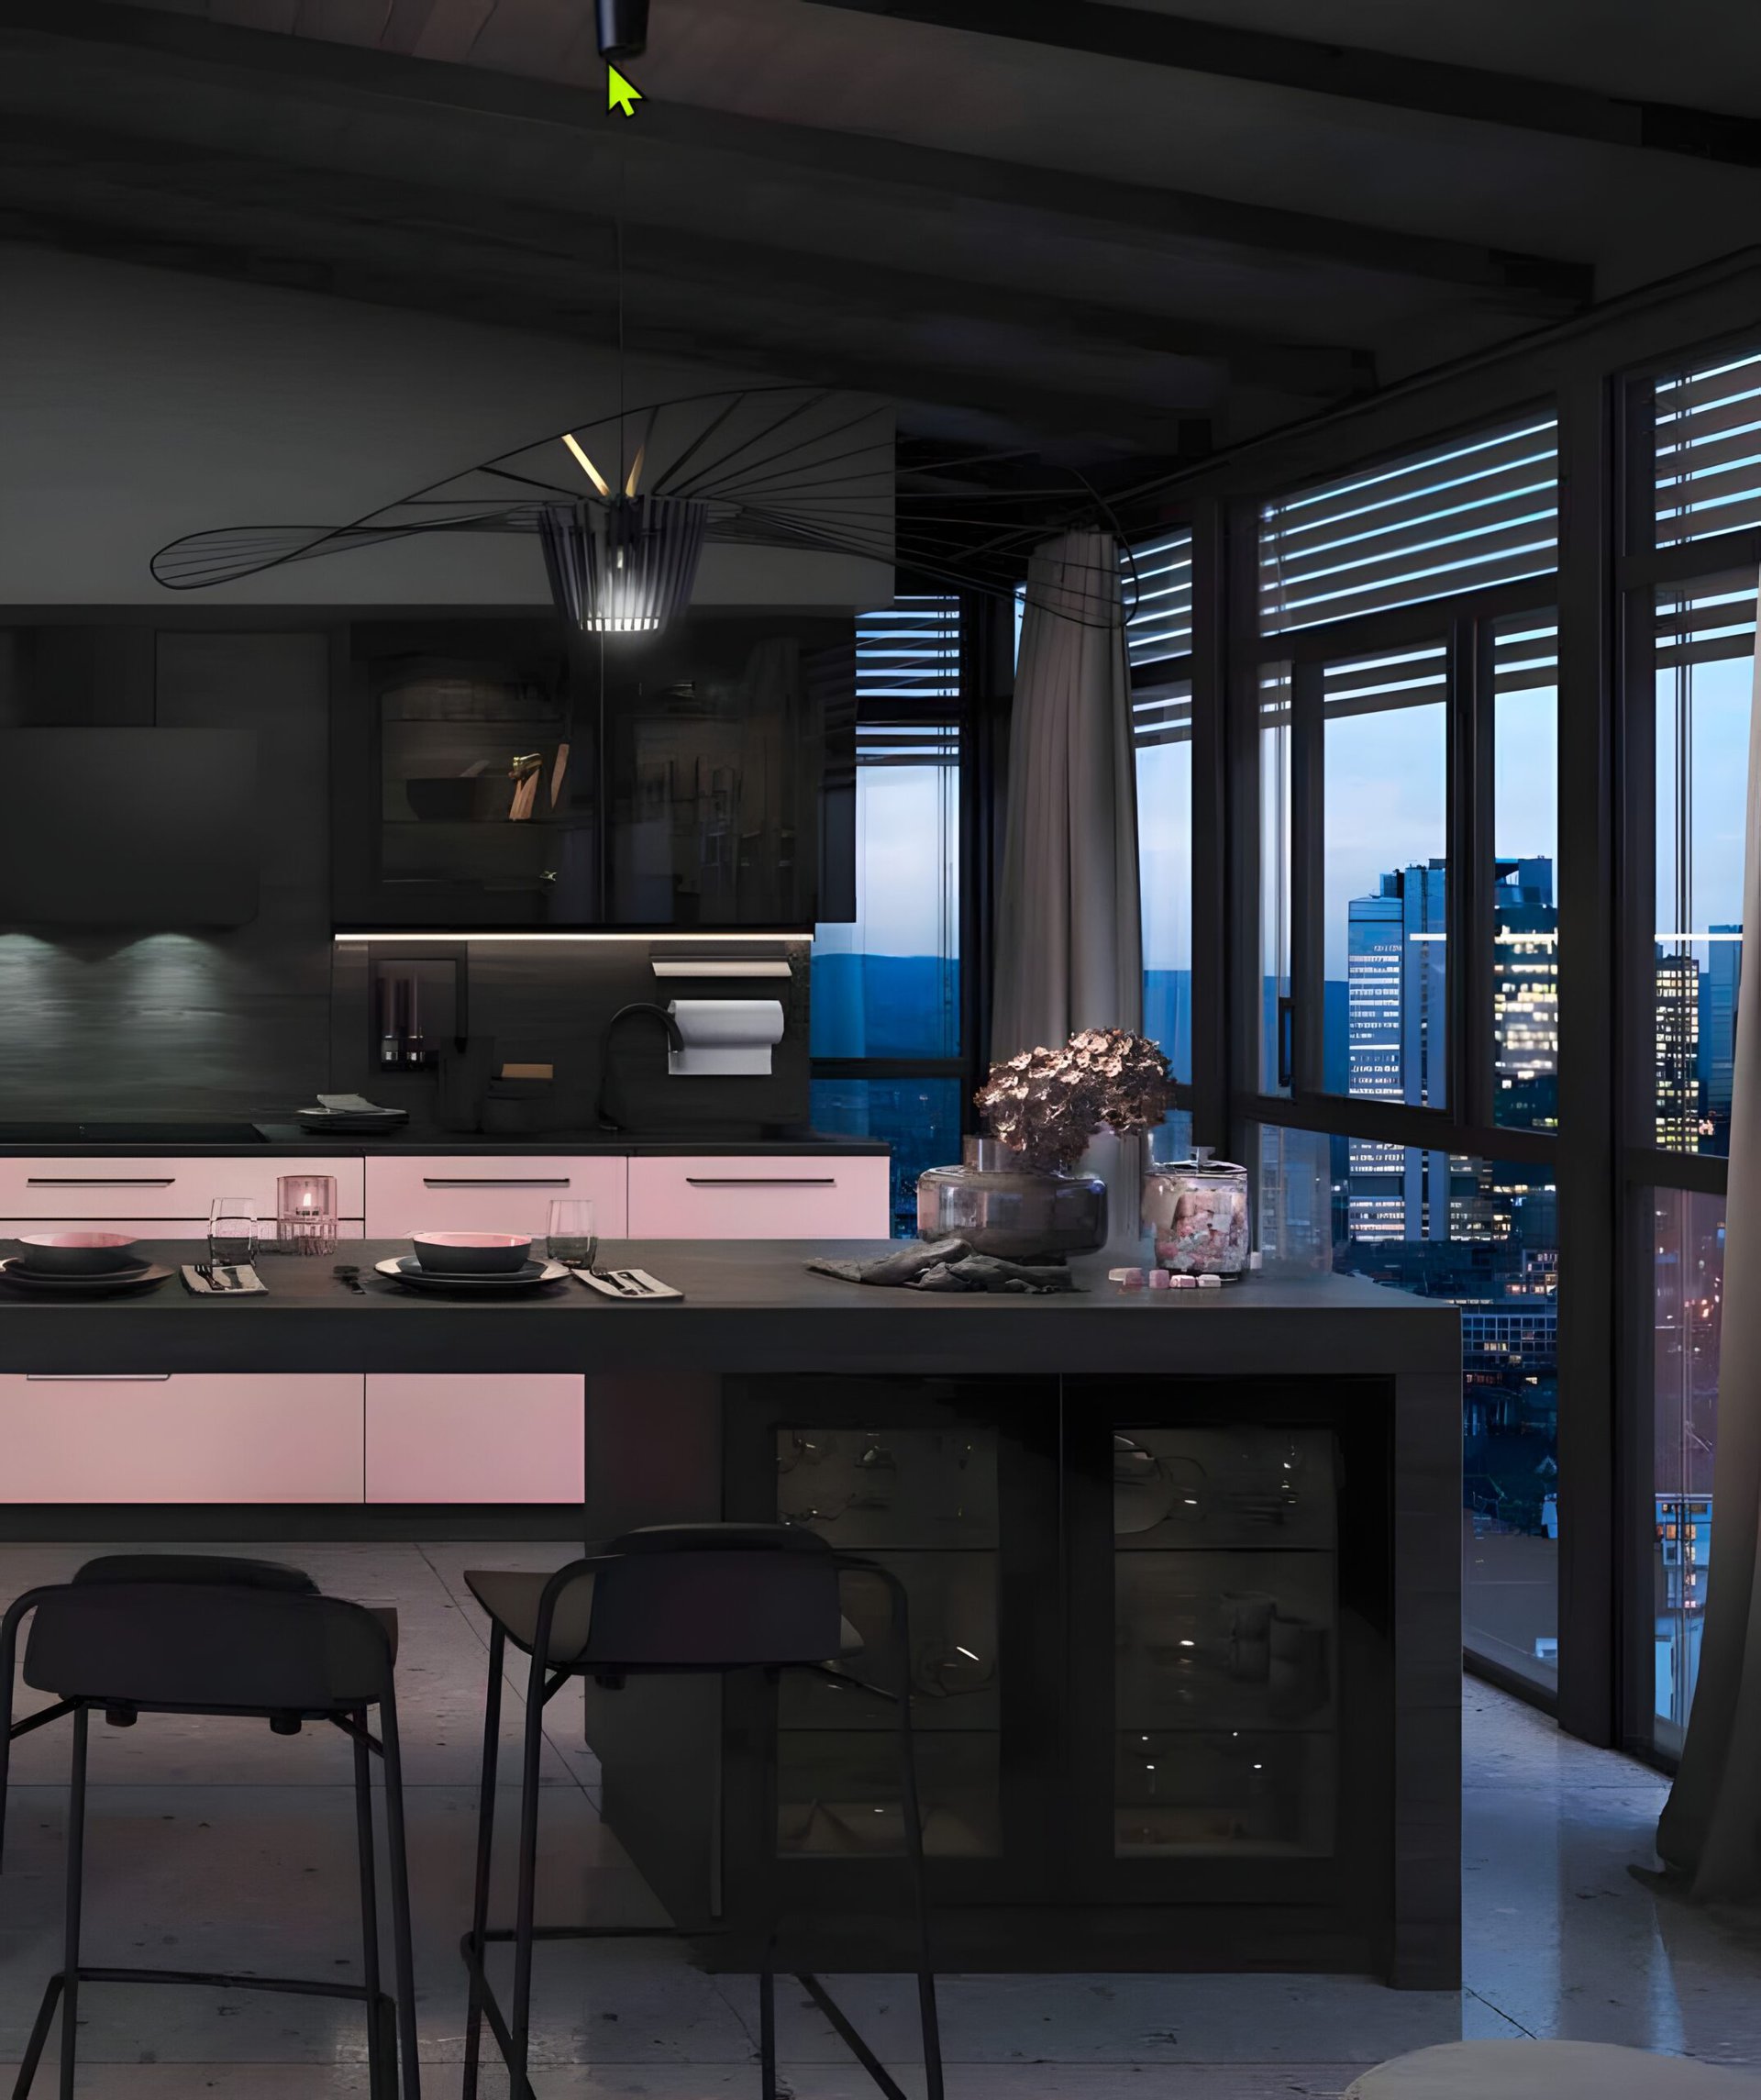 Modern kitchen interior at dusk with bar stools, large windows overlooking a cityscape, and ambient lighting, showcasing the interconnectivity in Bauformat design.